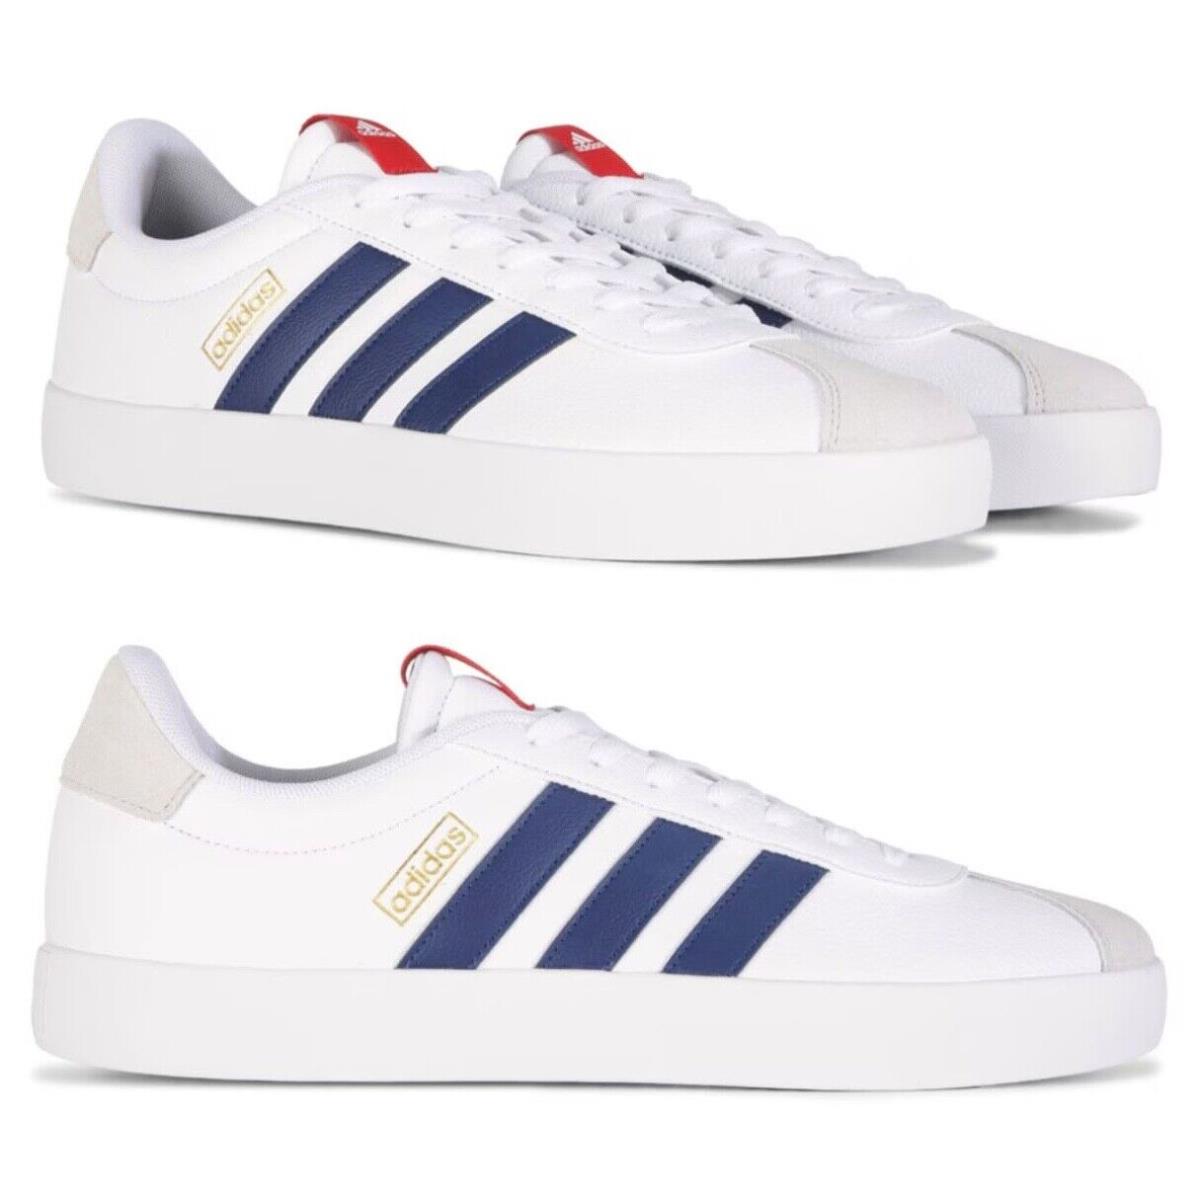 Adidas Retro Shoes Classic Mens Athletic Sneaker Casual White Blue All Sizes